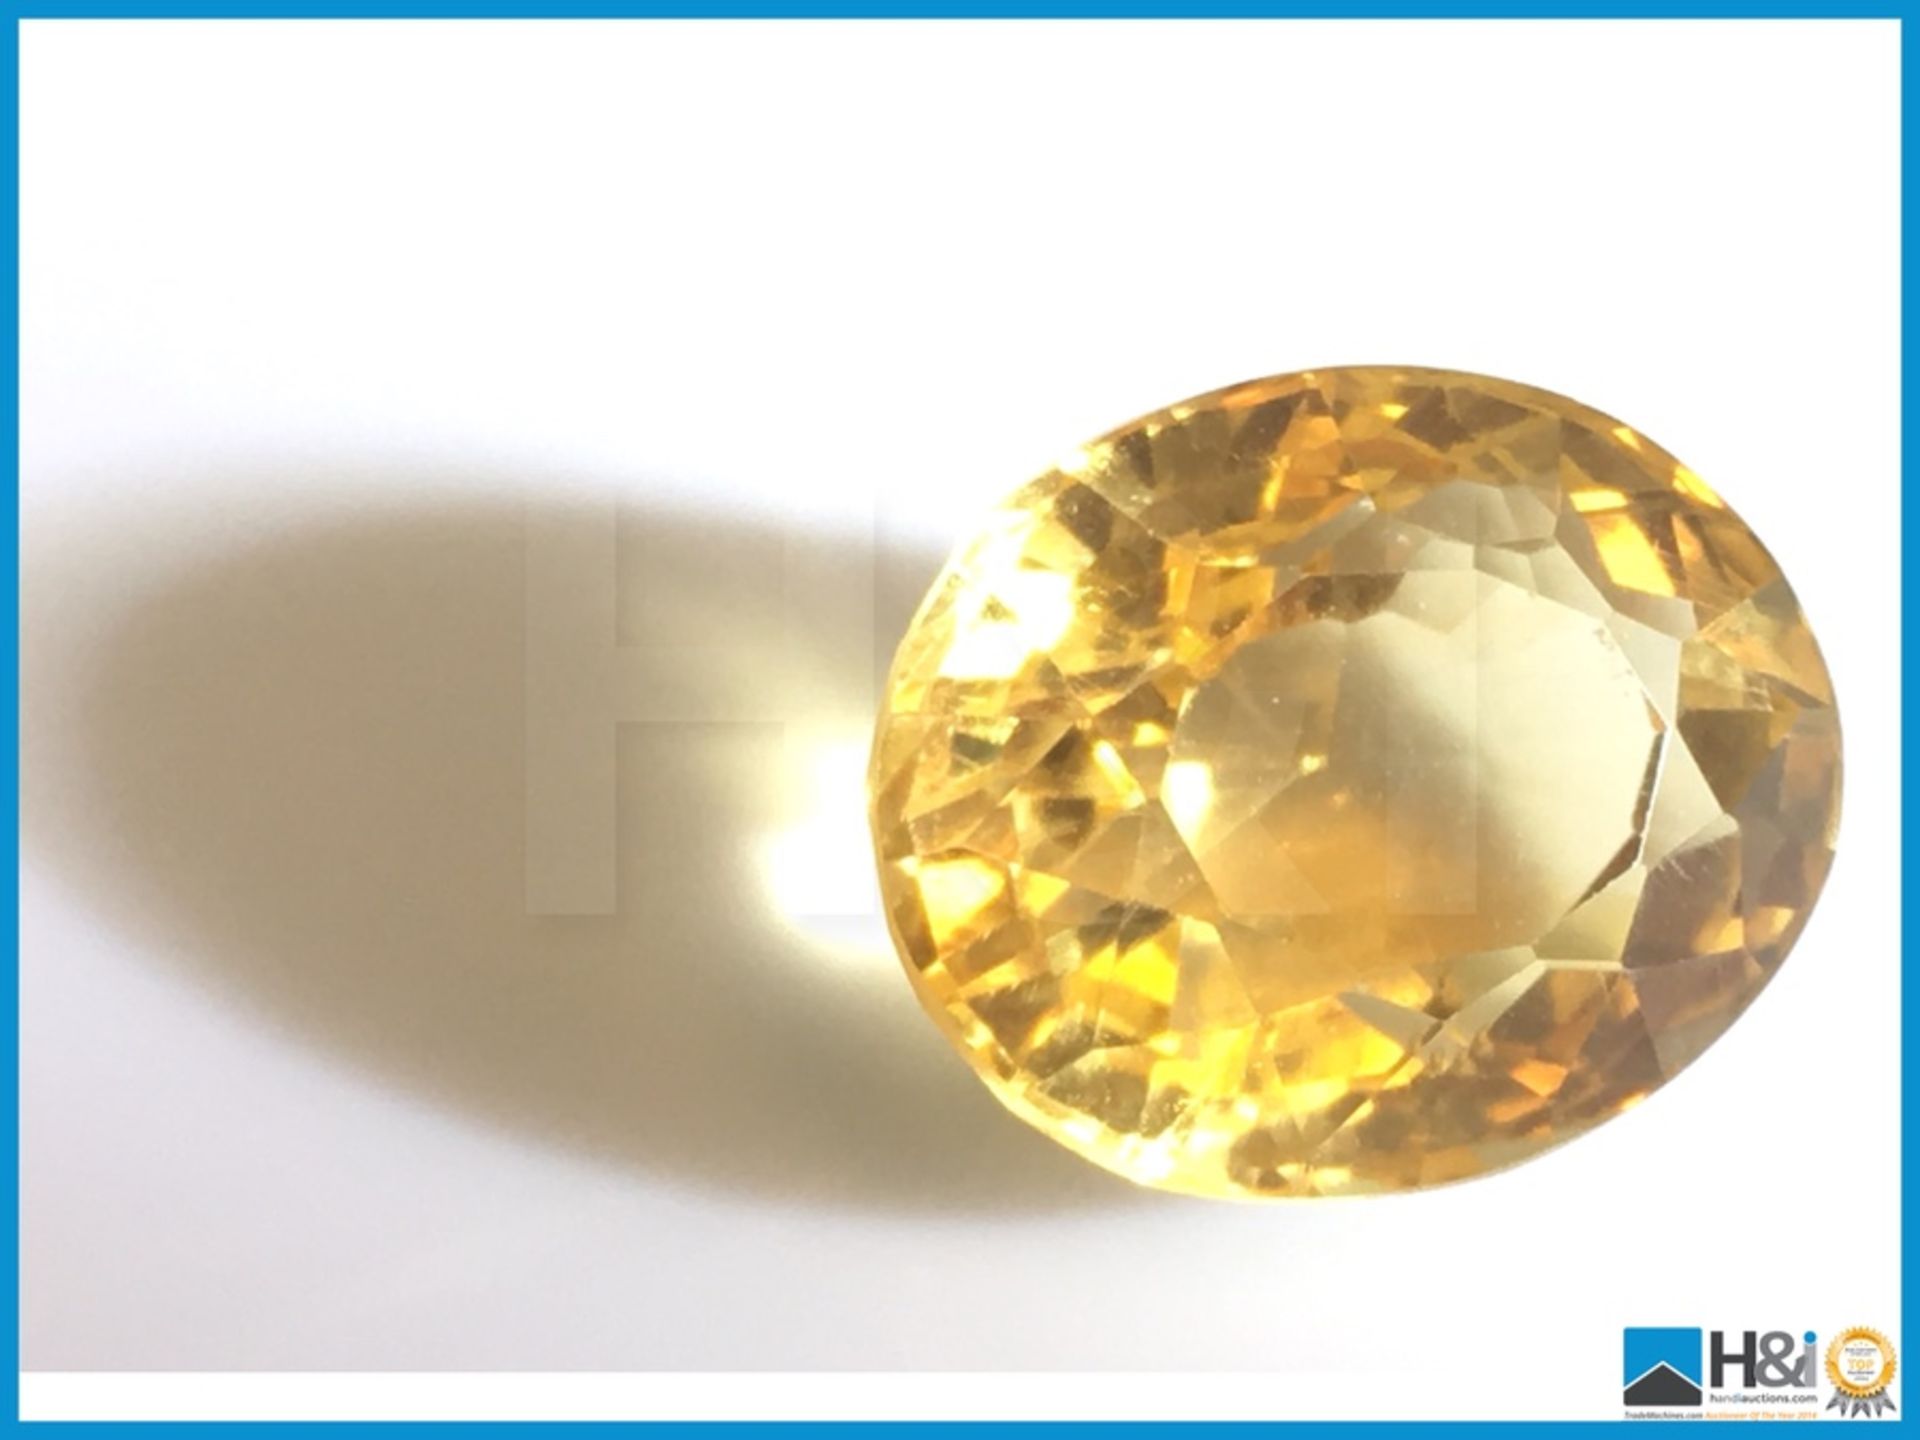 9.80ct Natural Citrine in Yellow. Oval Cut, Transparent 13.90x11.44x10.50mm. Certification: None